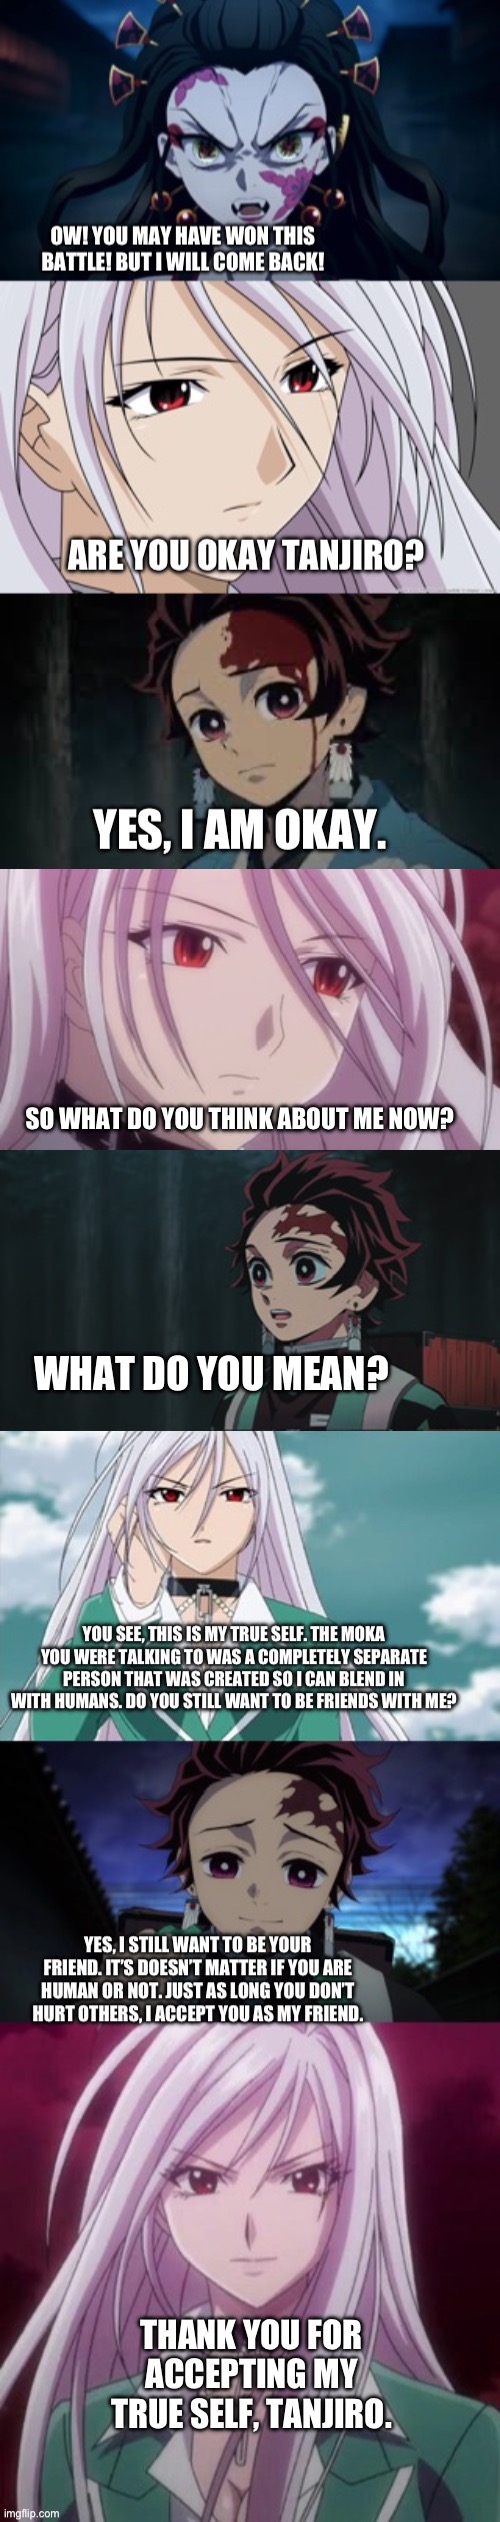 After the battle between Daki and Moka Akashiya | SO WHAT DO YOU THINK ABOUT ME NOW? WHAT DO YOU MEAN? THANK YOU FOR ACCEPTING MY TRUE SELF, TANJIRO. | image tagged in anime | made w/ Imgflip meme maker